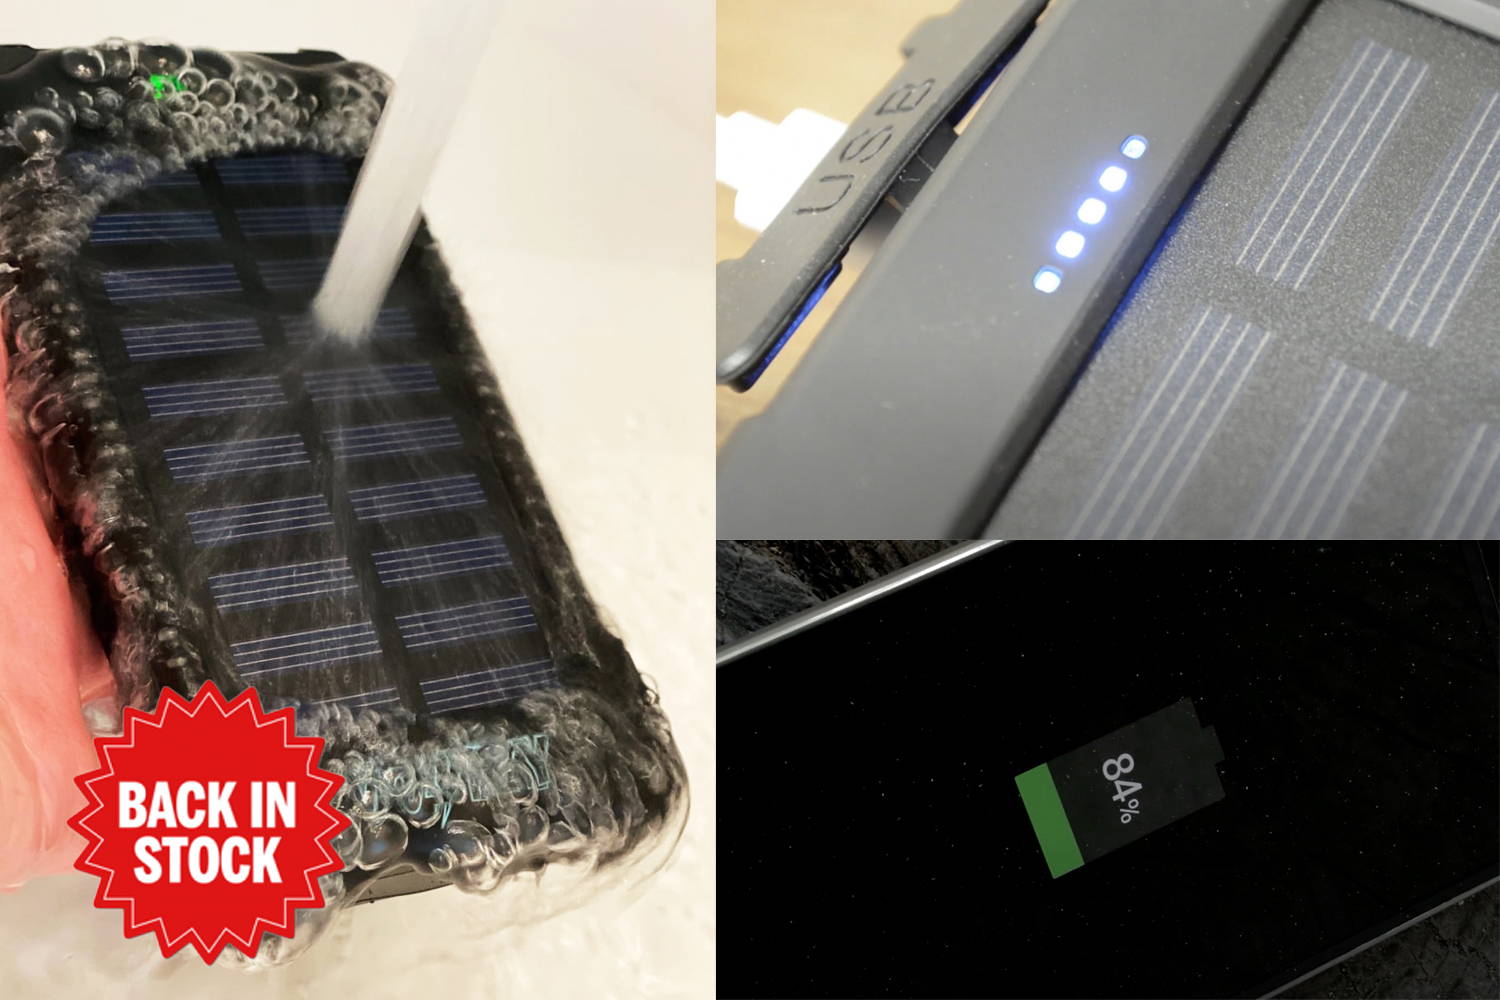 Voltzy, the portable solar powerbank, under water to show its IP67 water-resistant casing. 